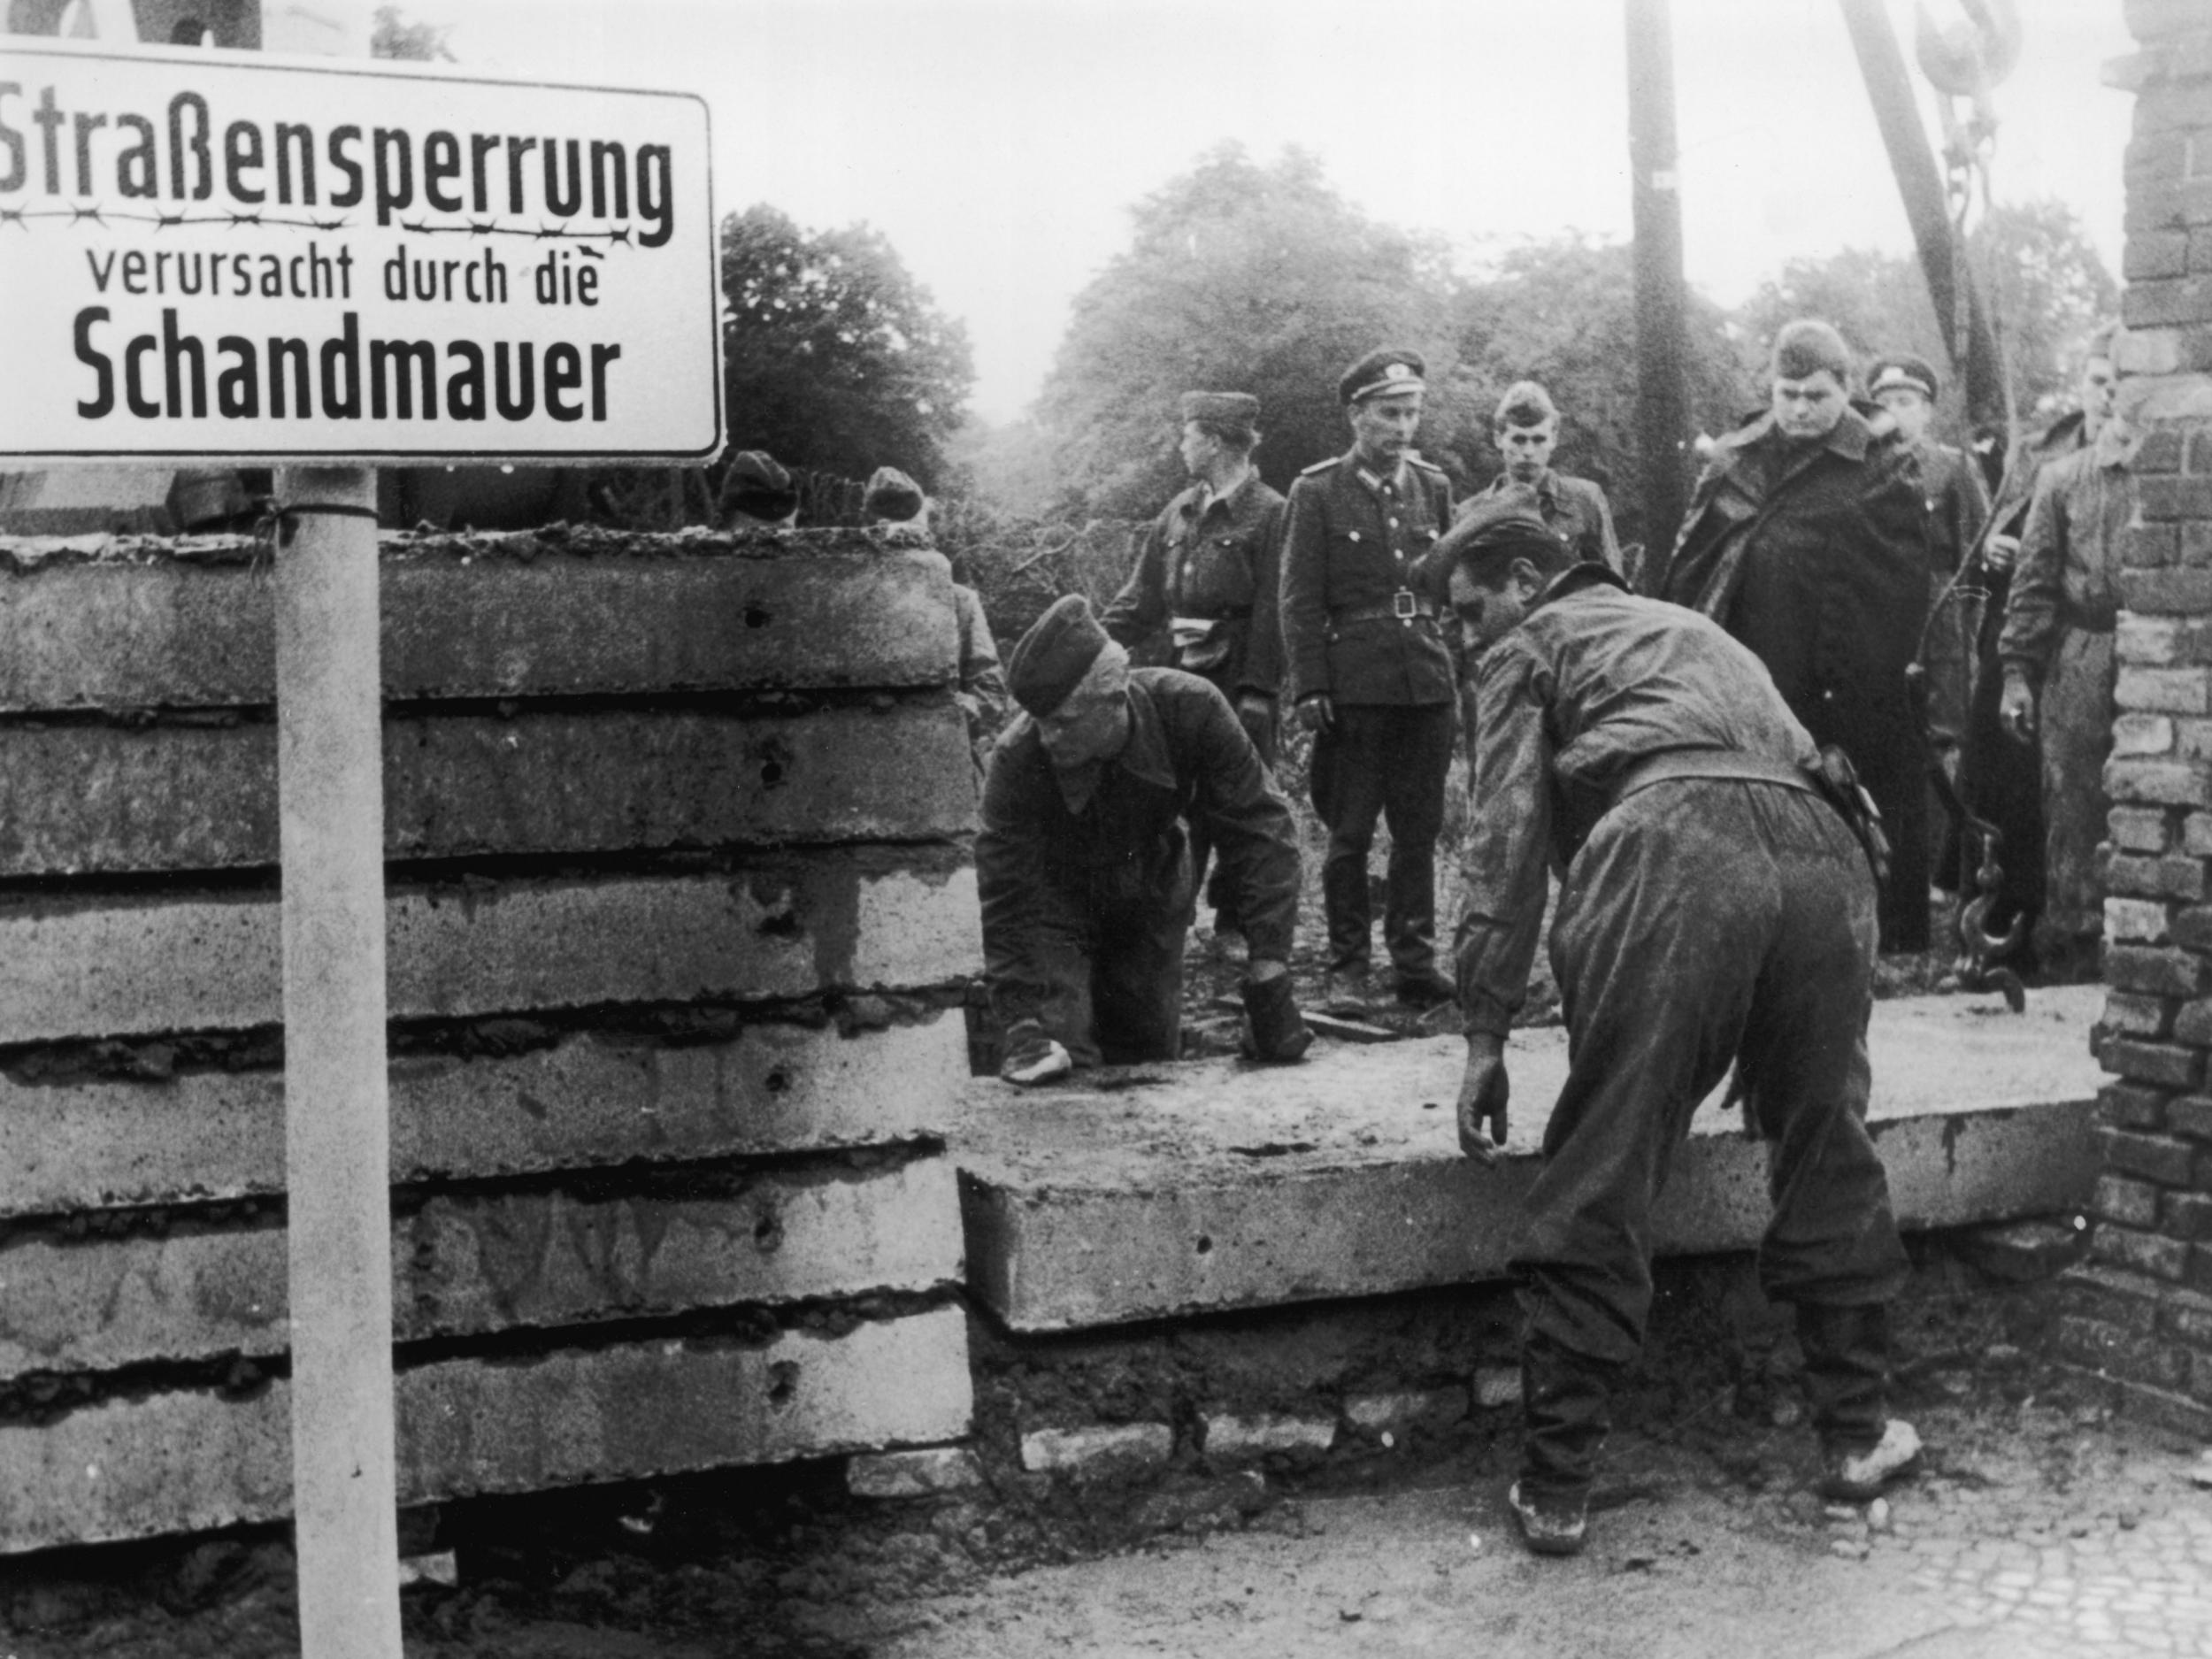 Soldiers building the Berlin Wall as instructed by the East German authorities in 1961